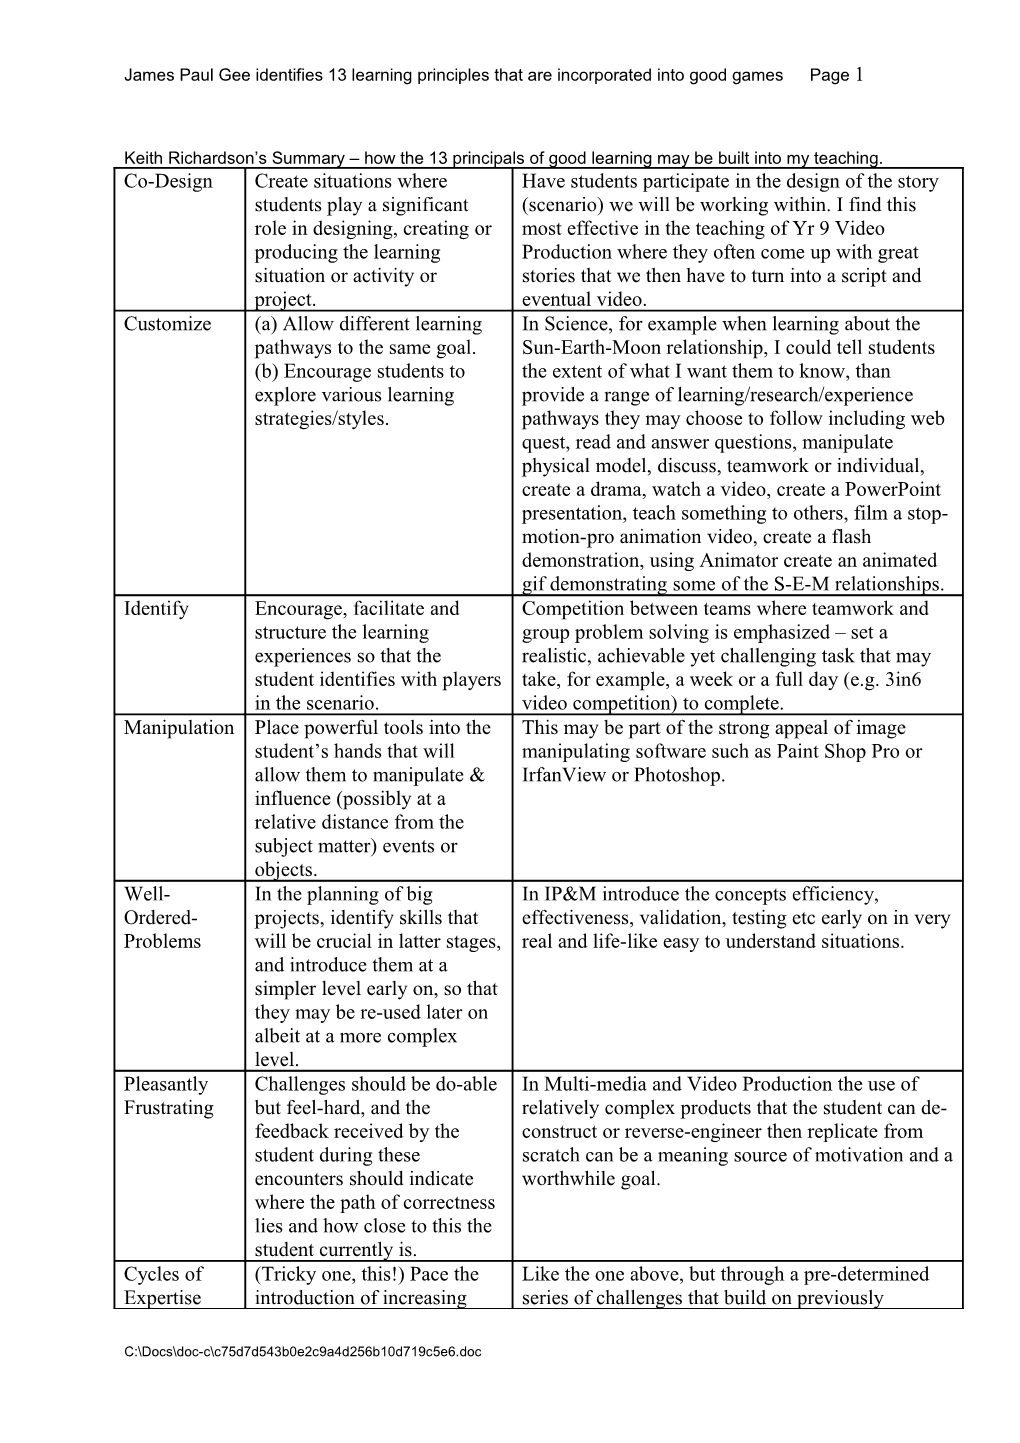 Keith Richardson S Summary How the 13 Principals of Good Learning May Be Built Into My Teaching